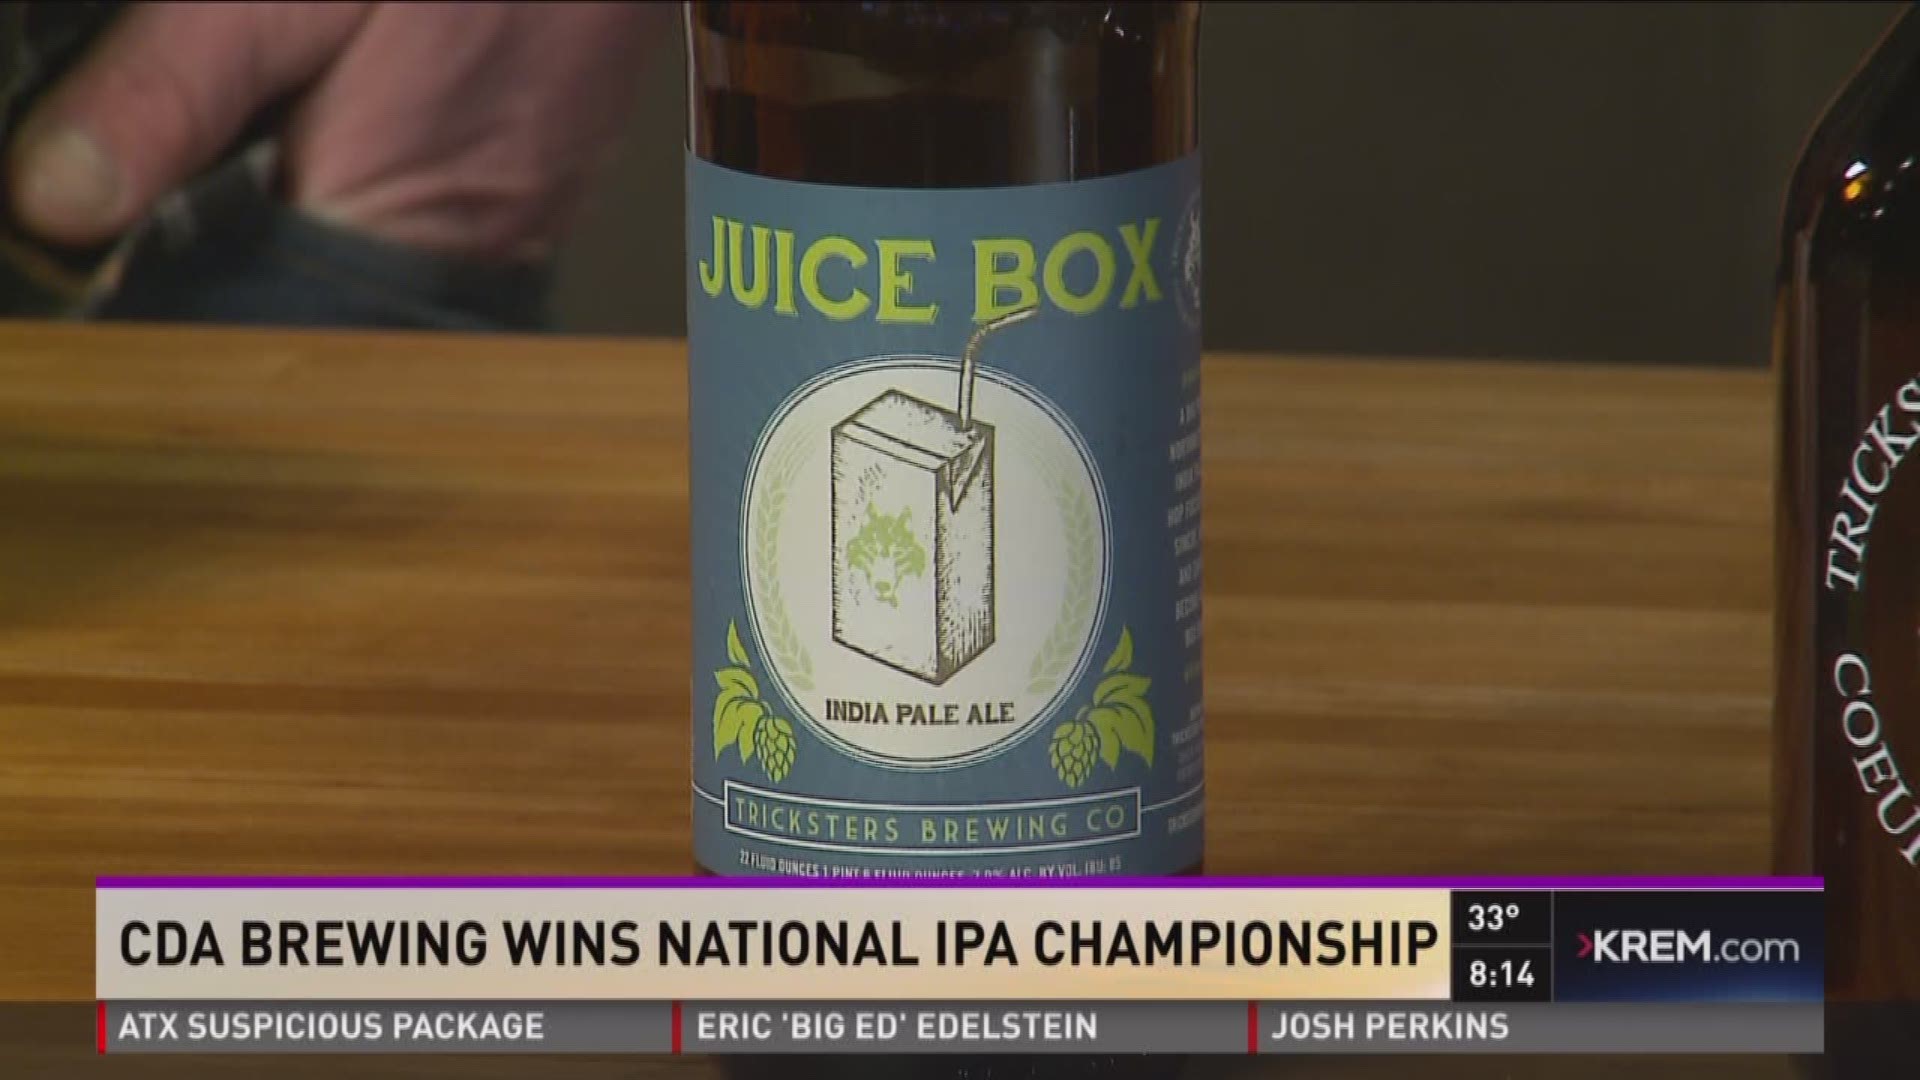 Trickster's Brewing Co. takes home gold in National IPA Championships